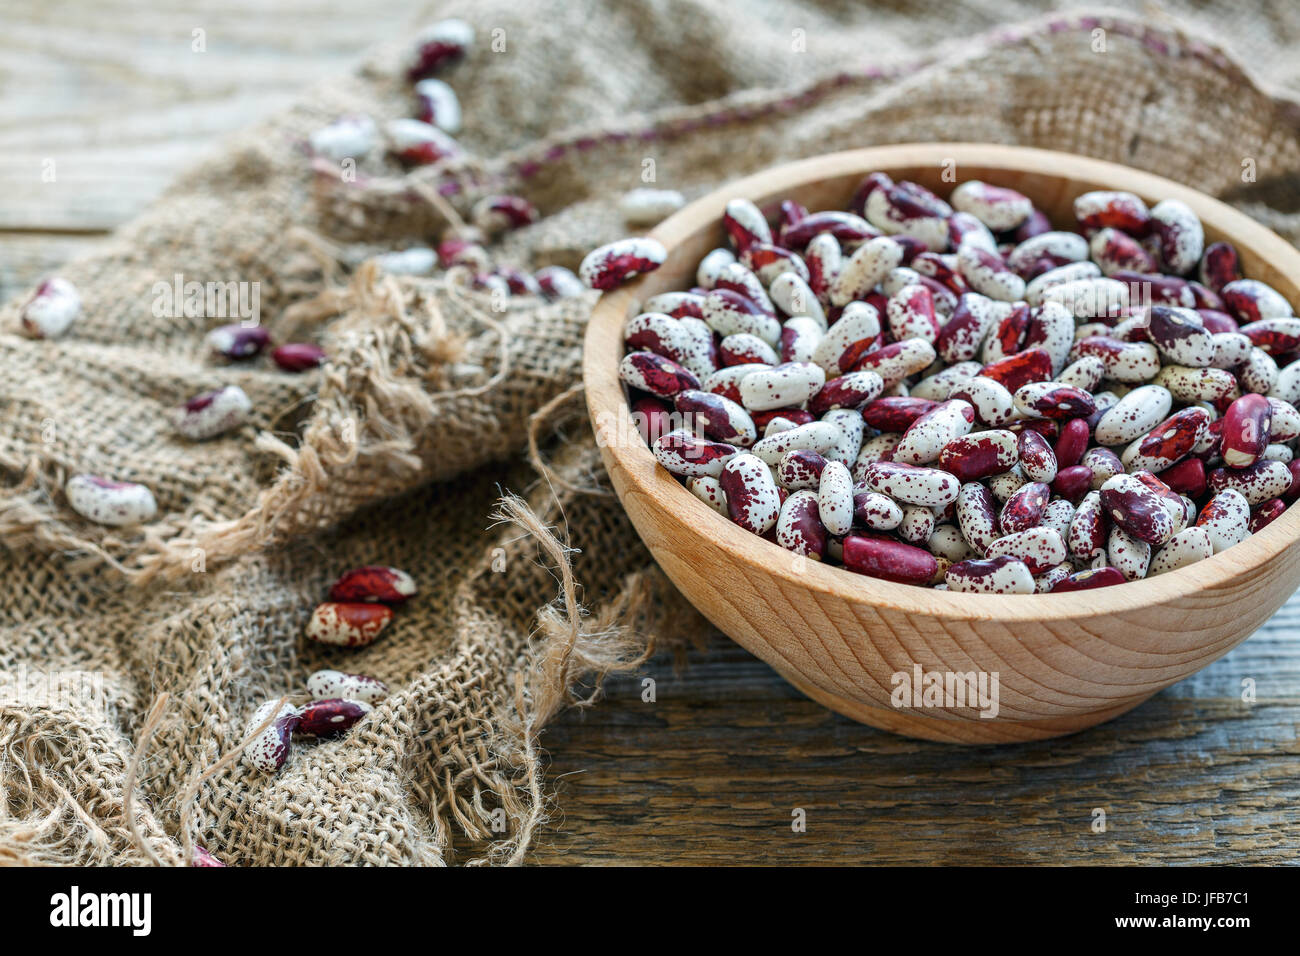 Speckled beans in a wooden bowl. Stock Photo